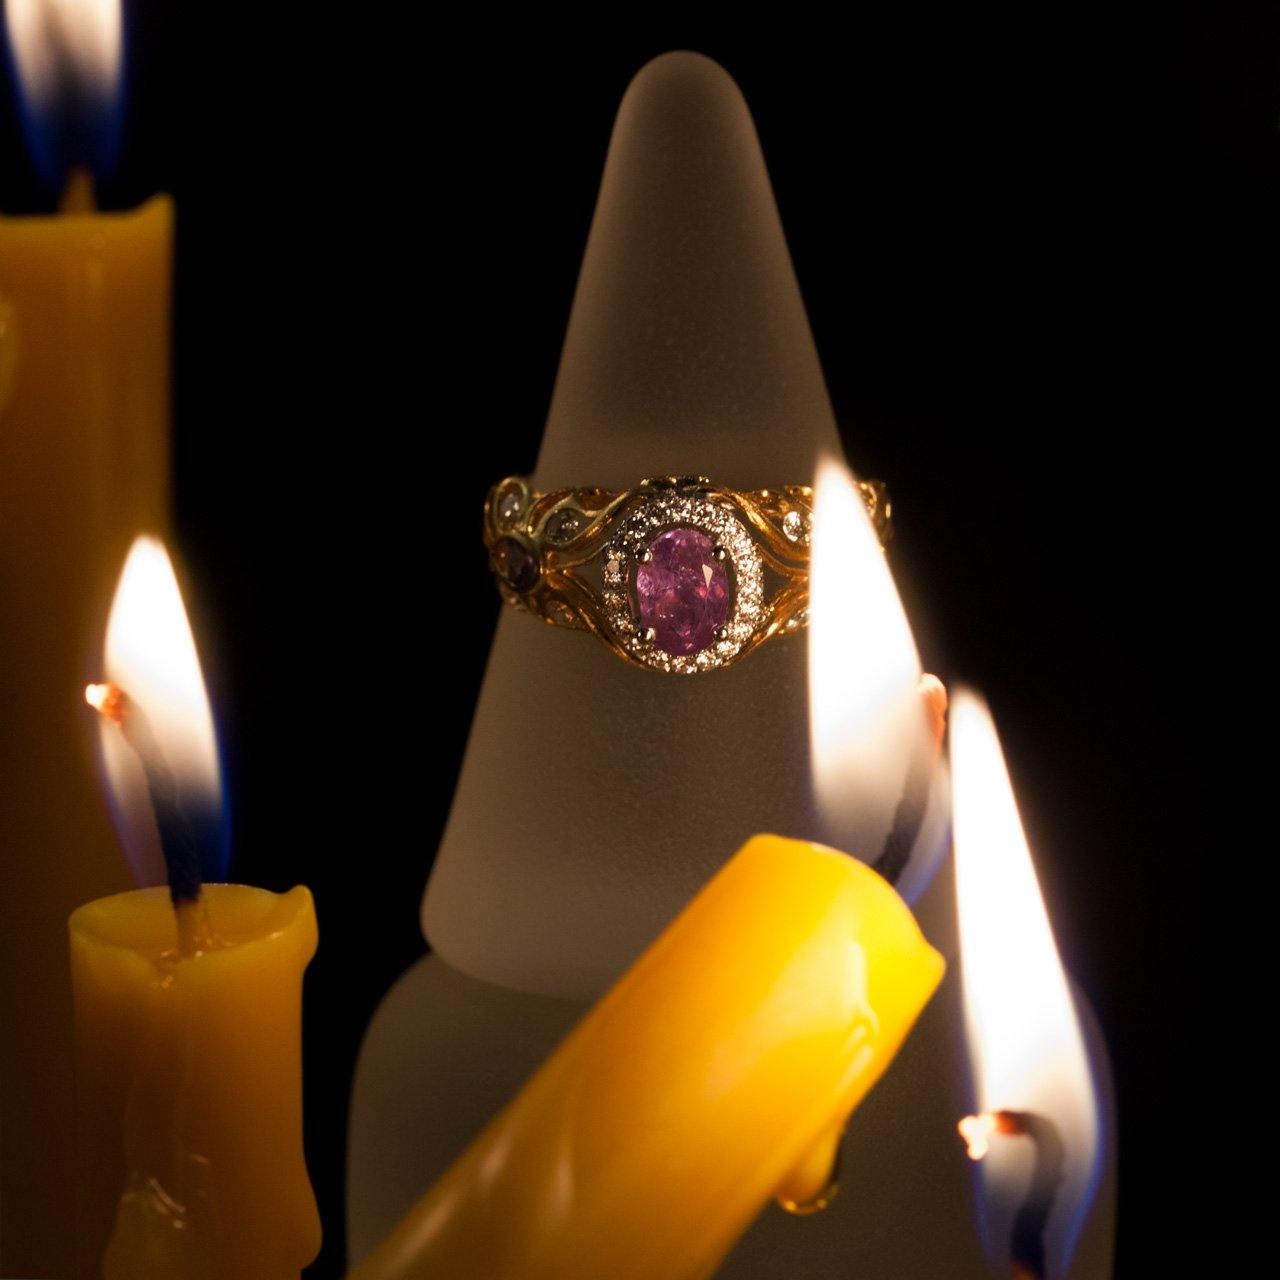 0.67ct natural Alexandrite 18k two-tone gold filigree ring placed beside a decorative candle